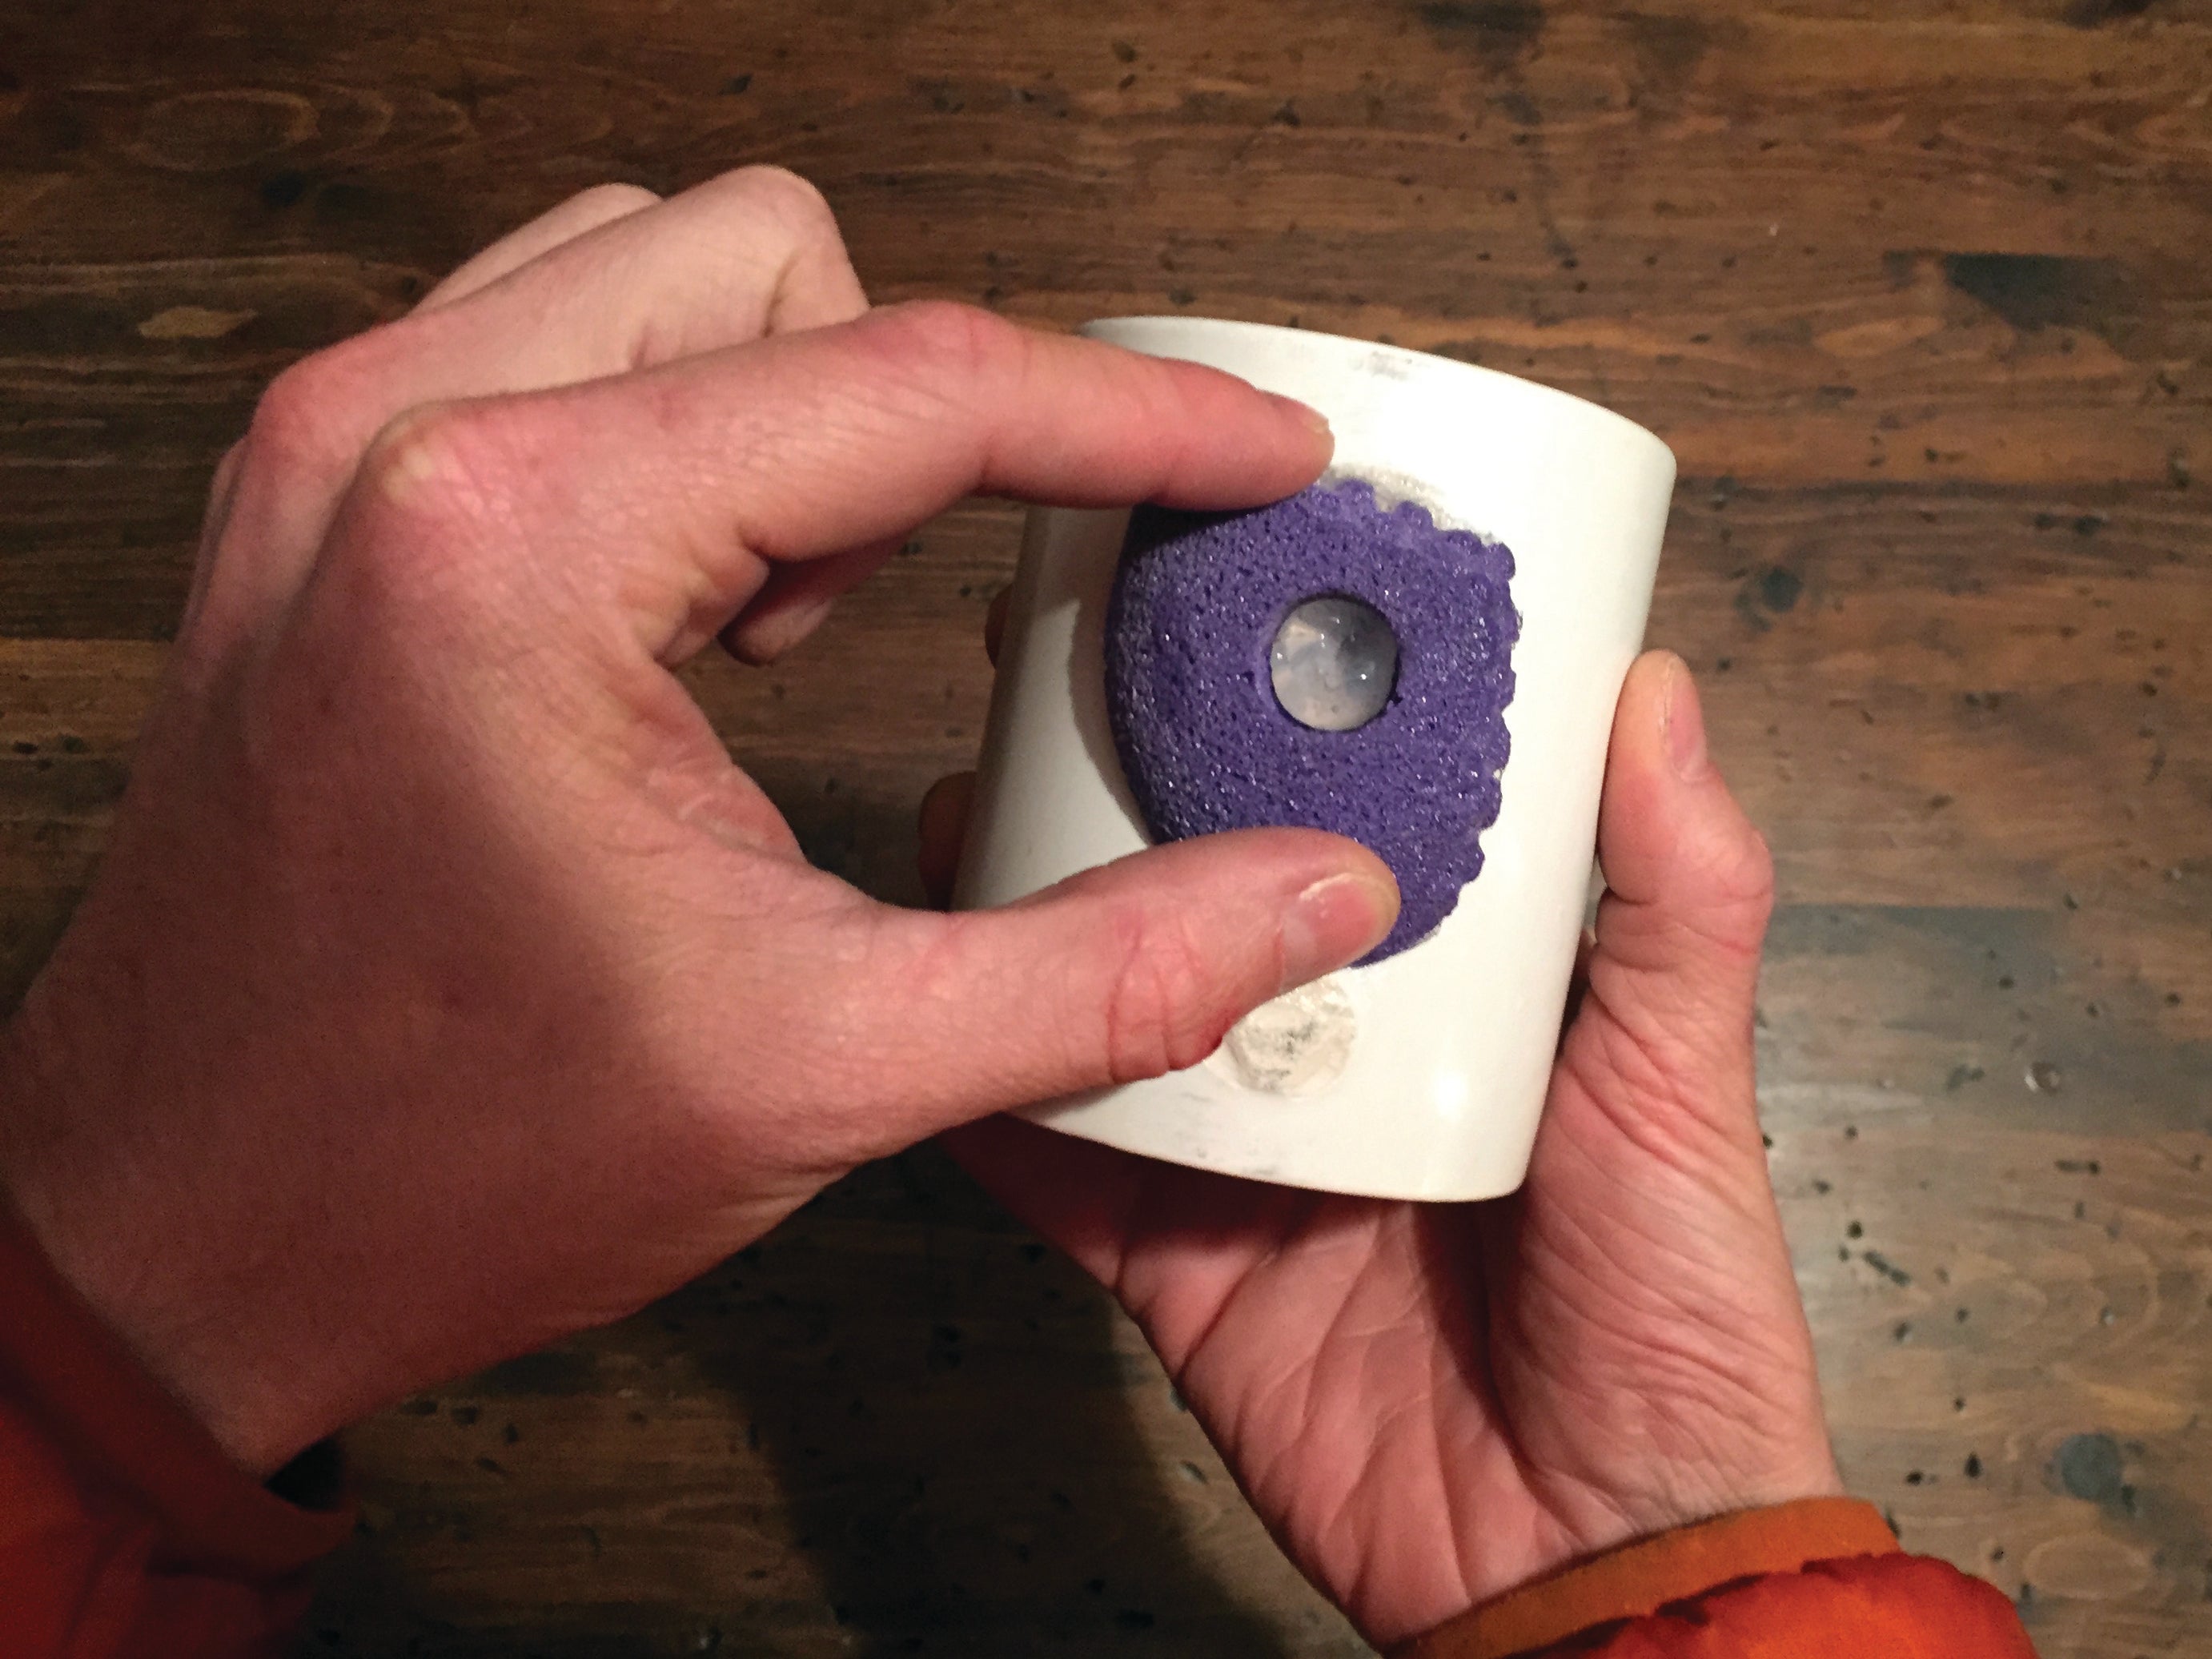 Rock Climbers Pinch Hold Mug That's Nearly Impossible To Use